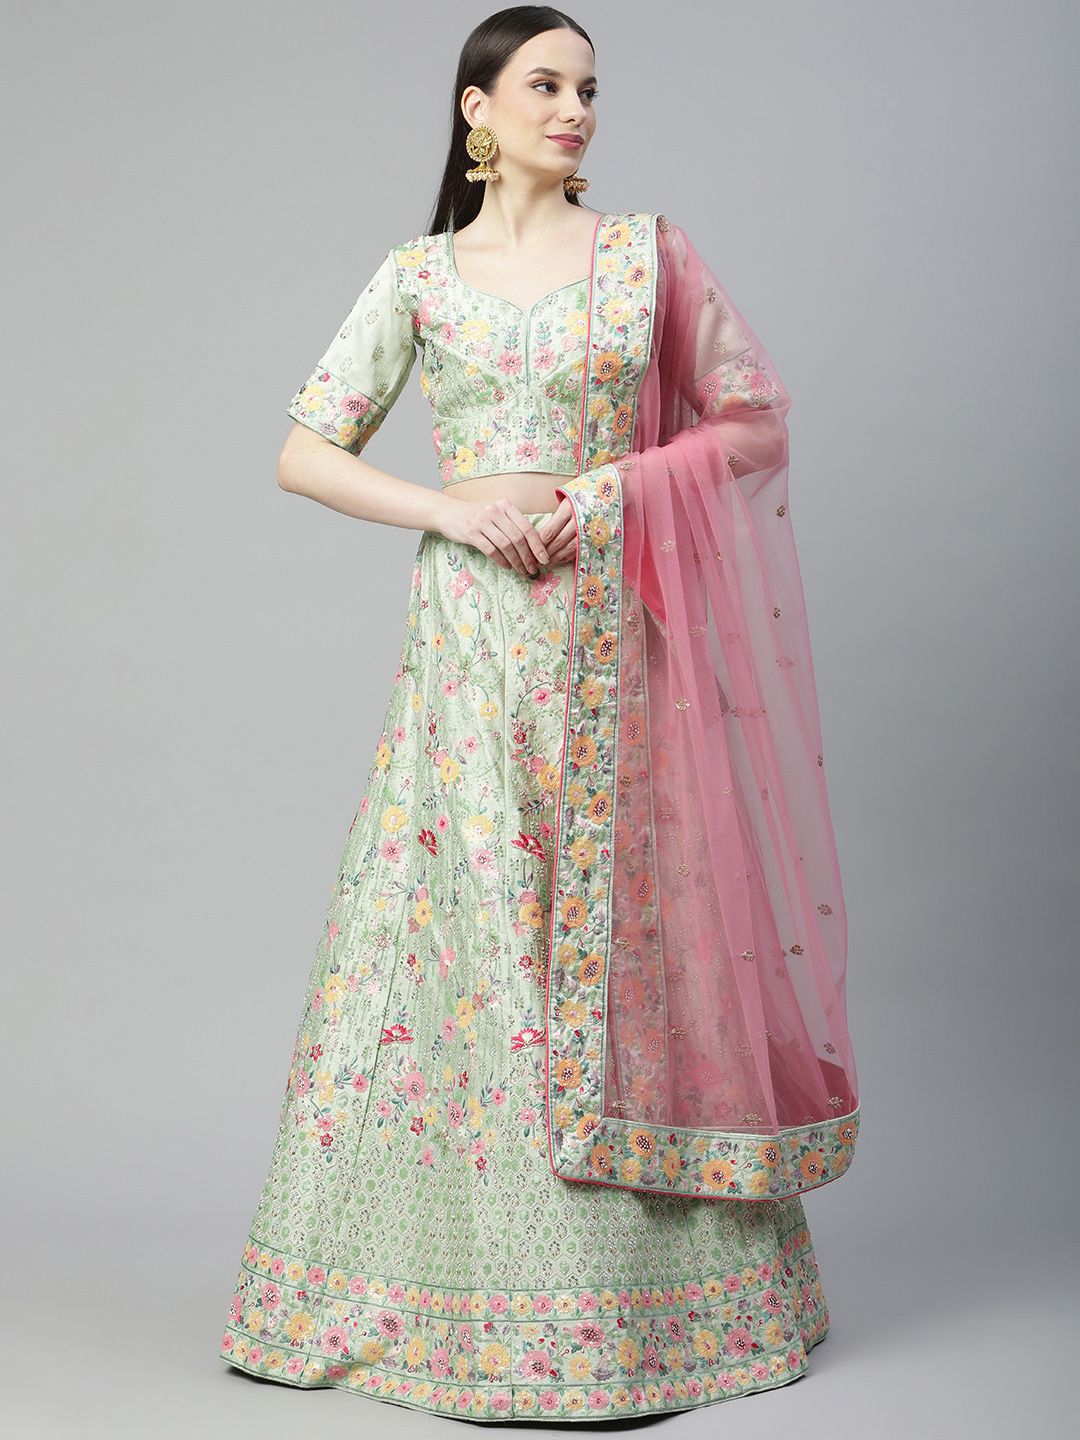 Readiprint Fashions Green Embroidered Semi-Stitched Lehenga & Unstitched Blouse With Dupatta Price in India